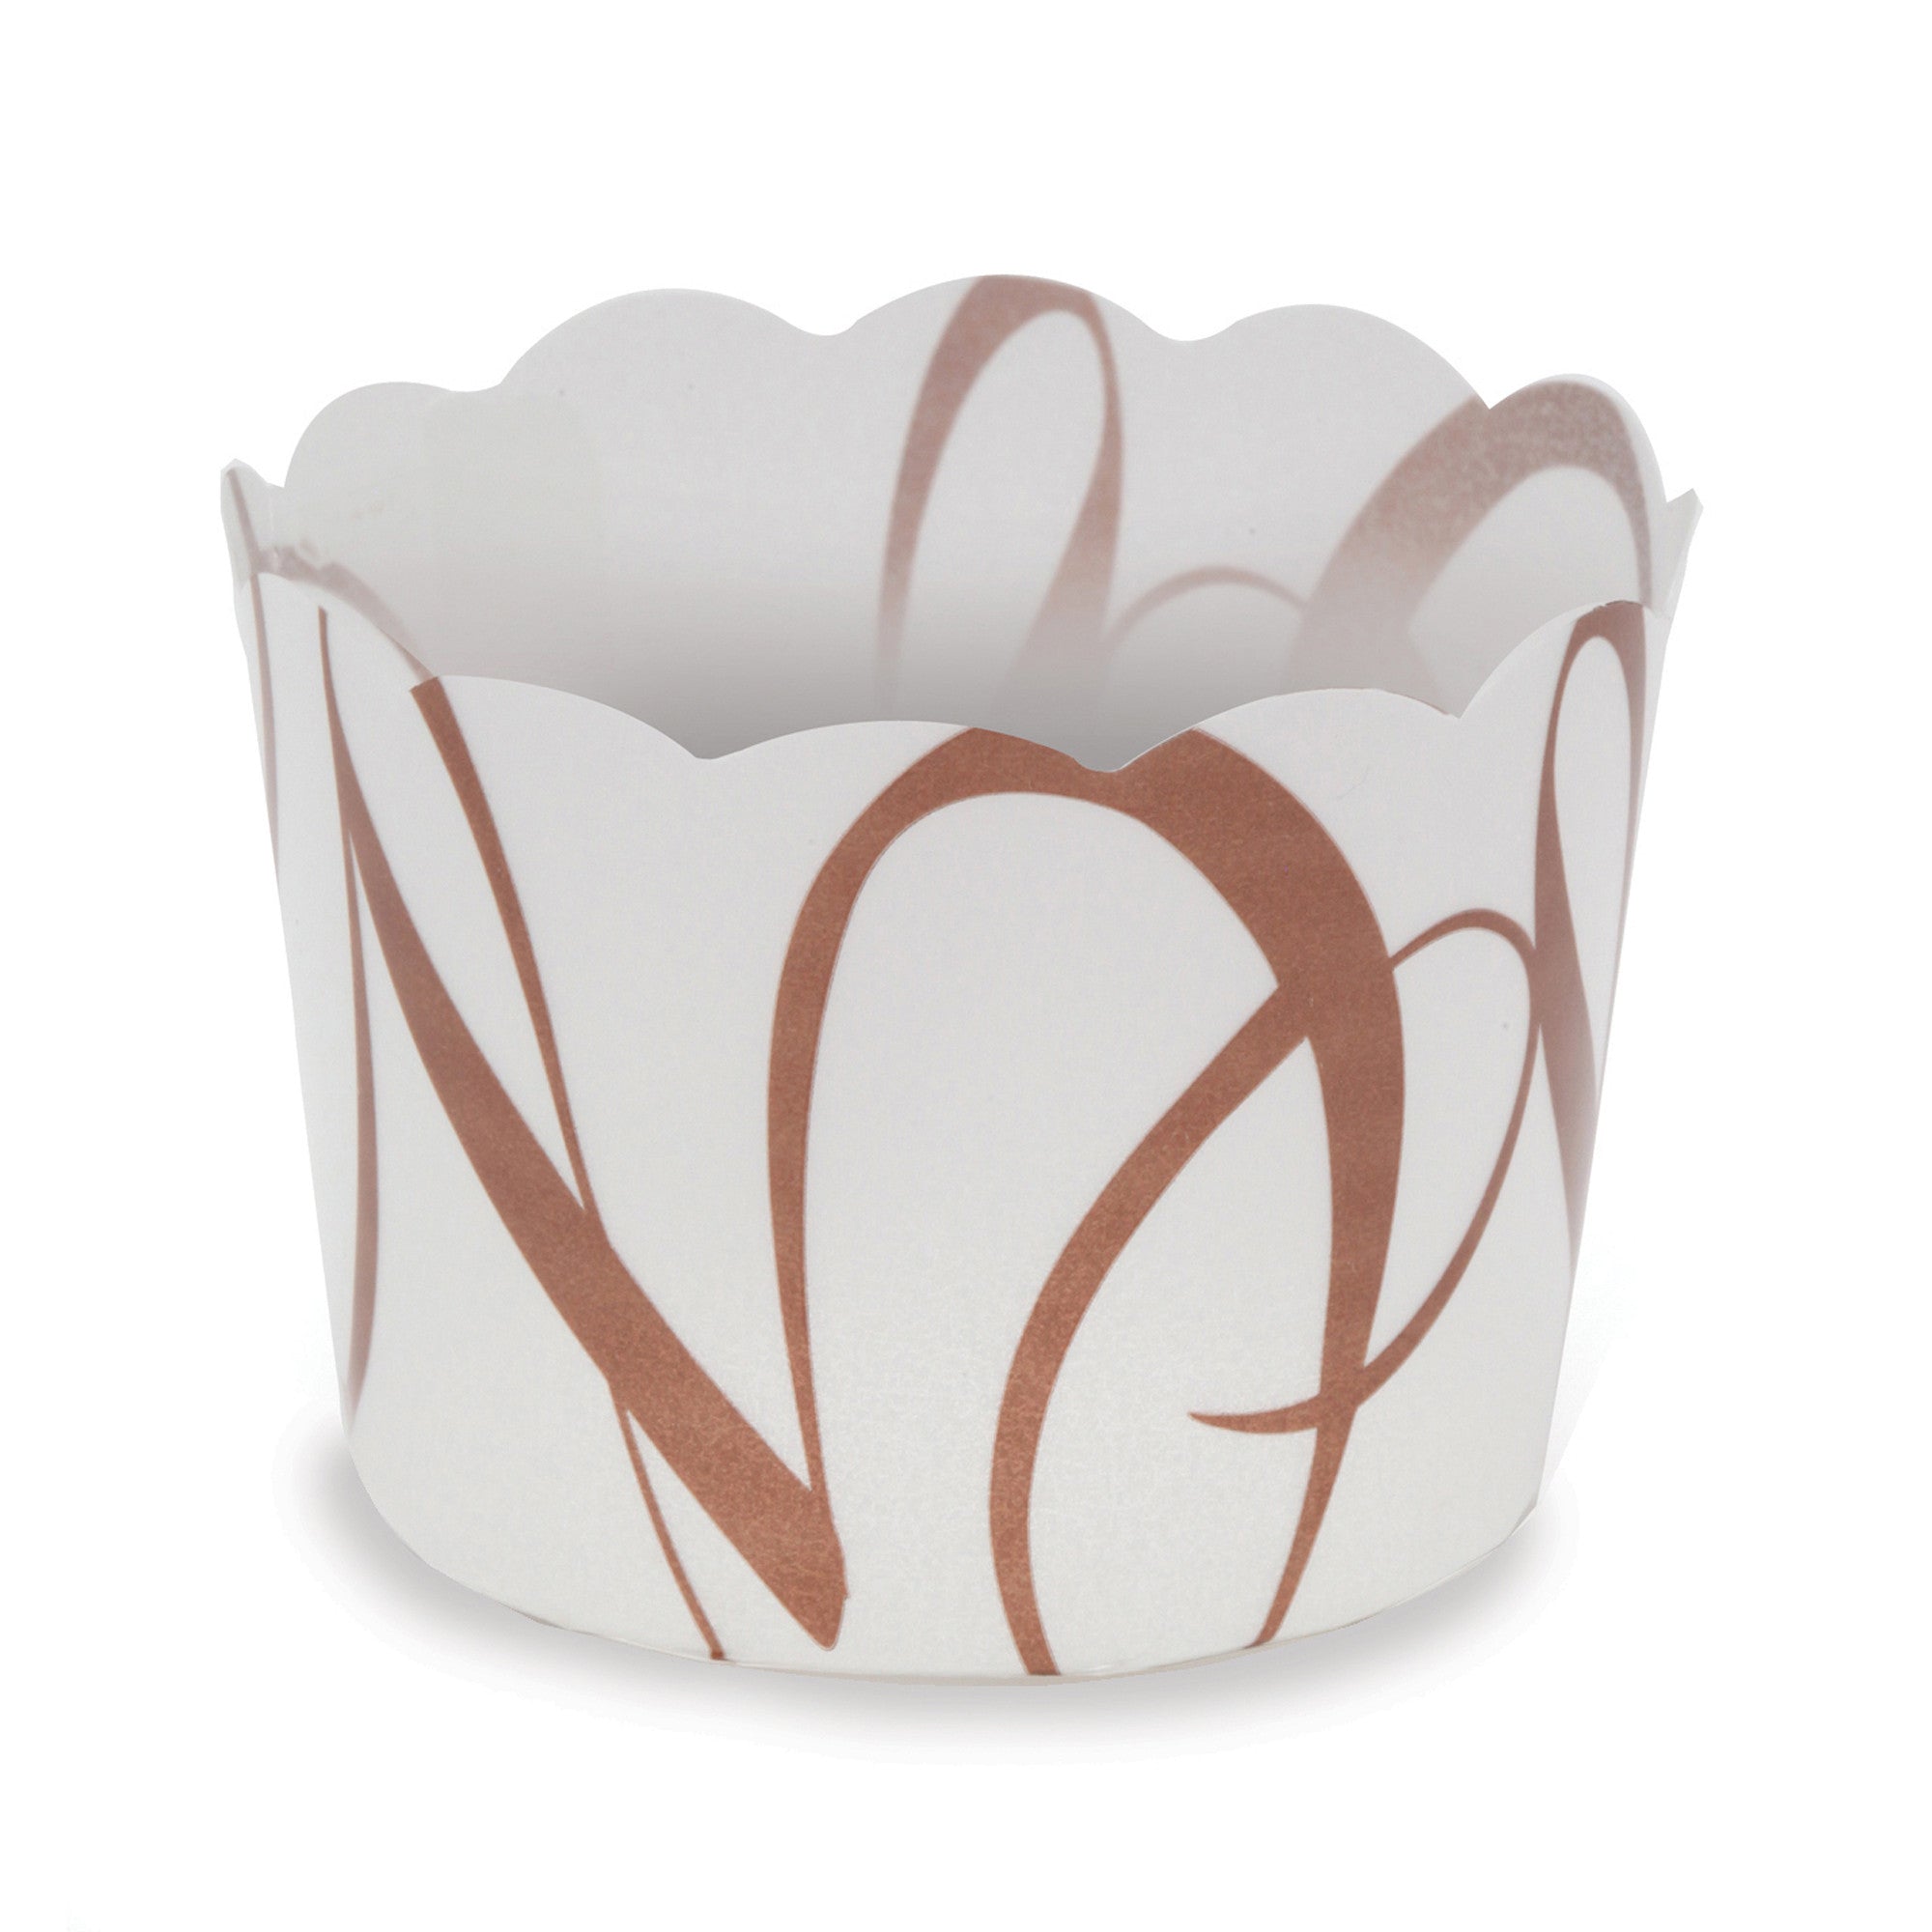 Plastic Baking Cups, CK63 - Welcome Home Brands